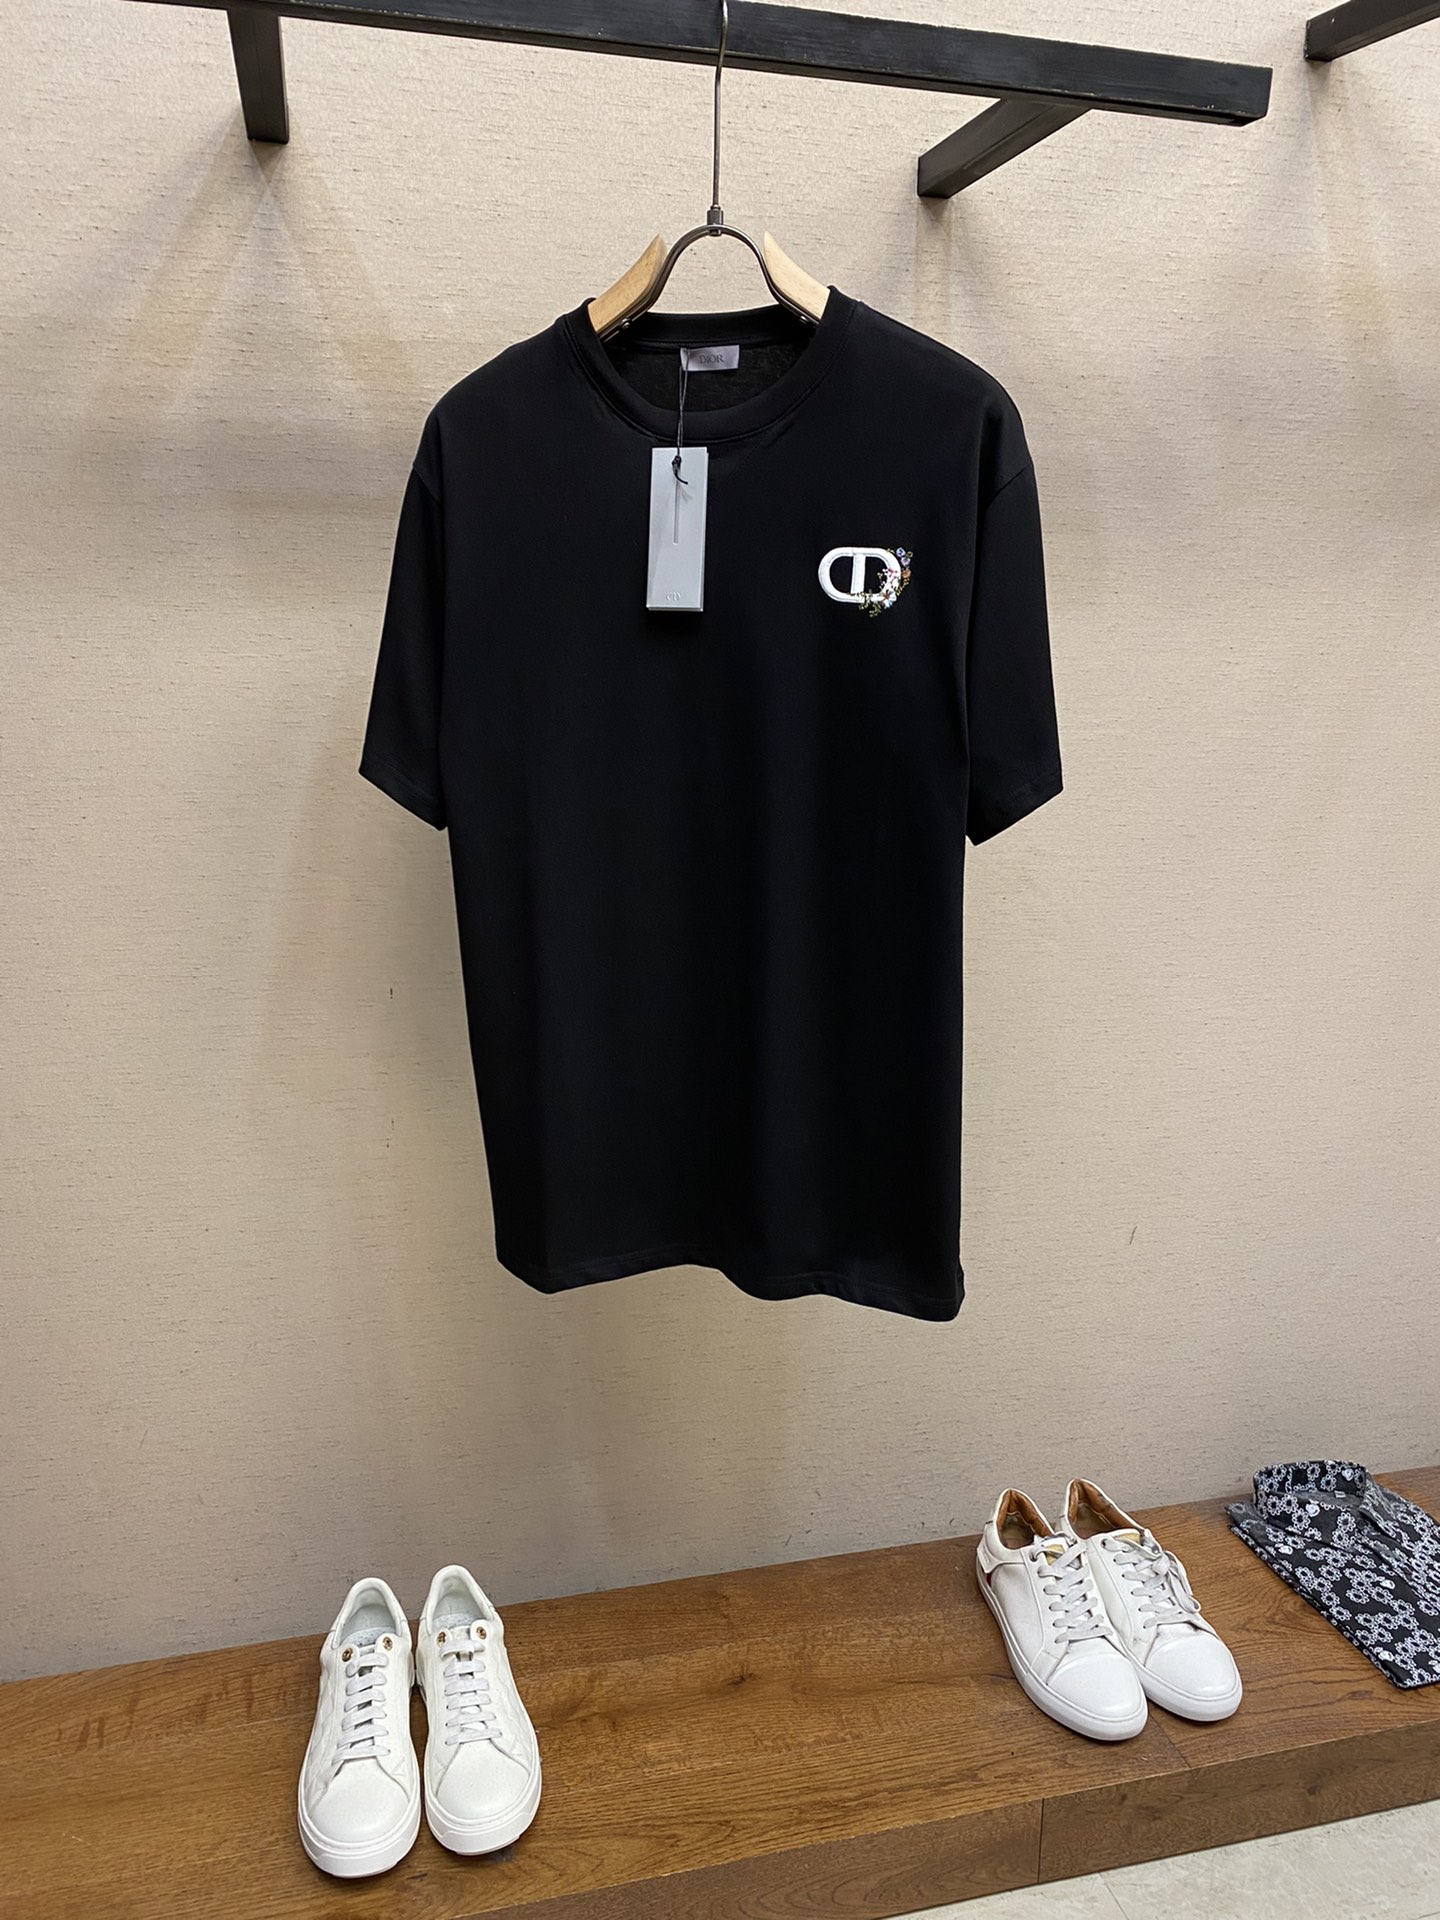 Dior Clothing T-Shirt Black White Embroidery Cotton Short Sleeve